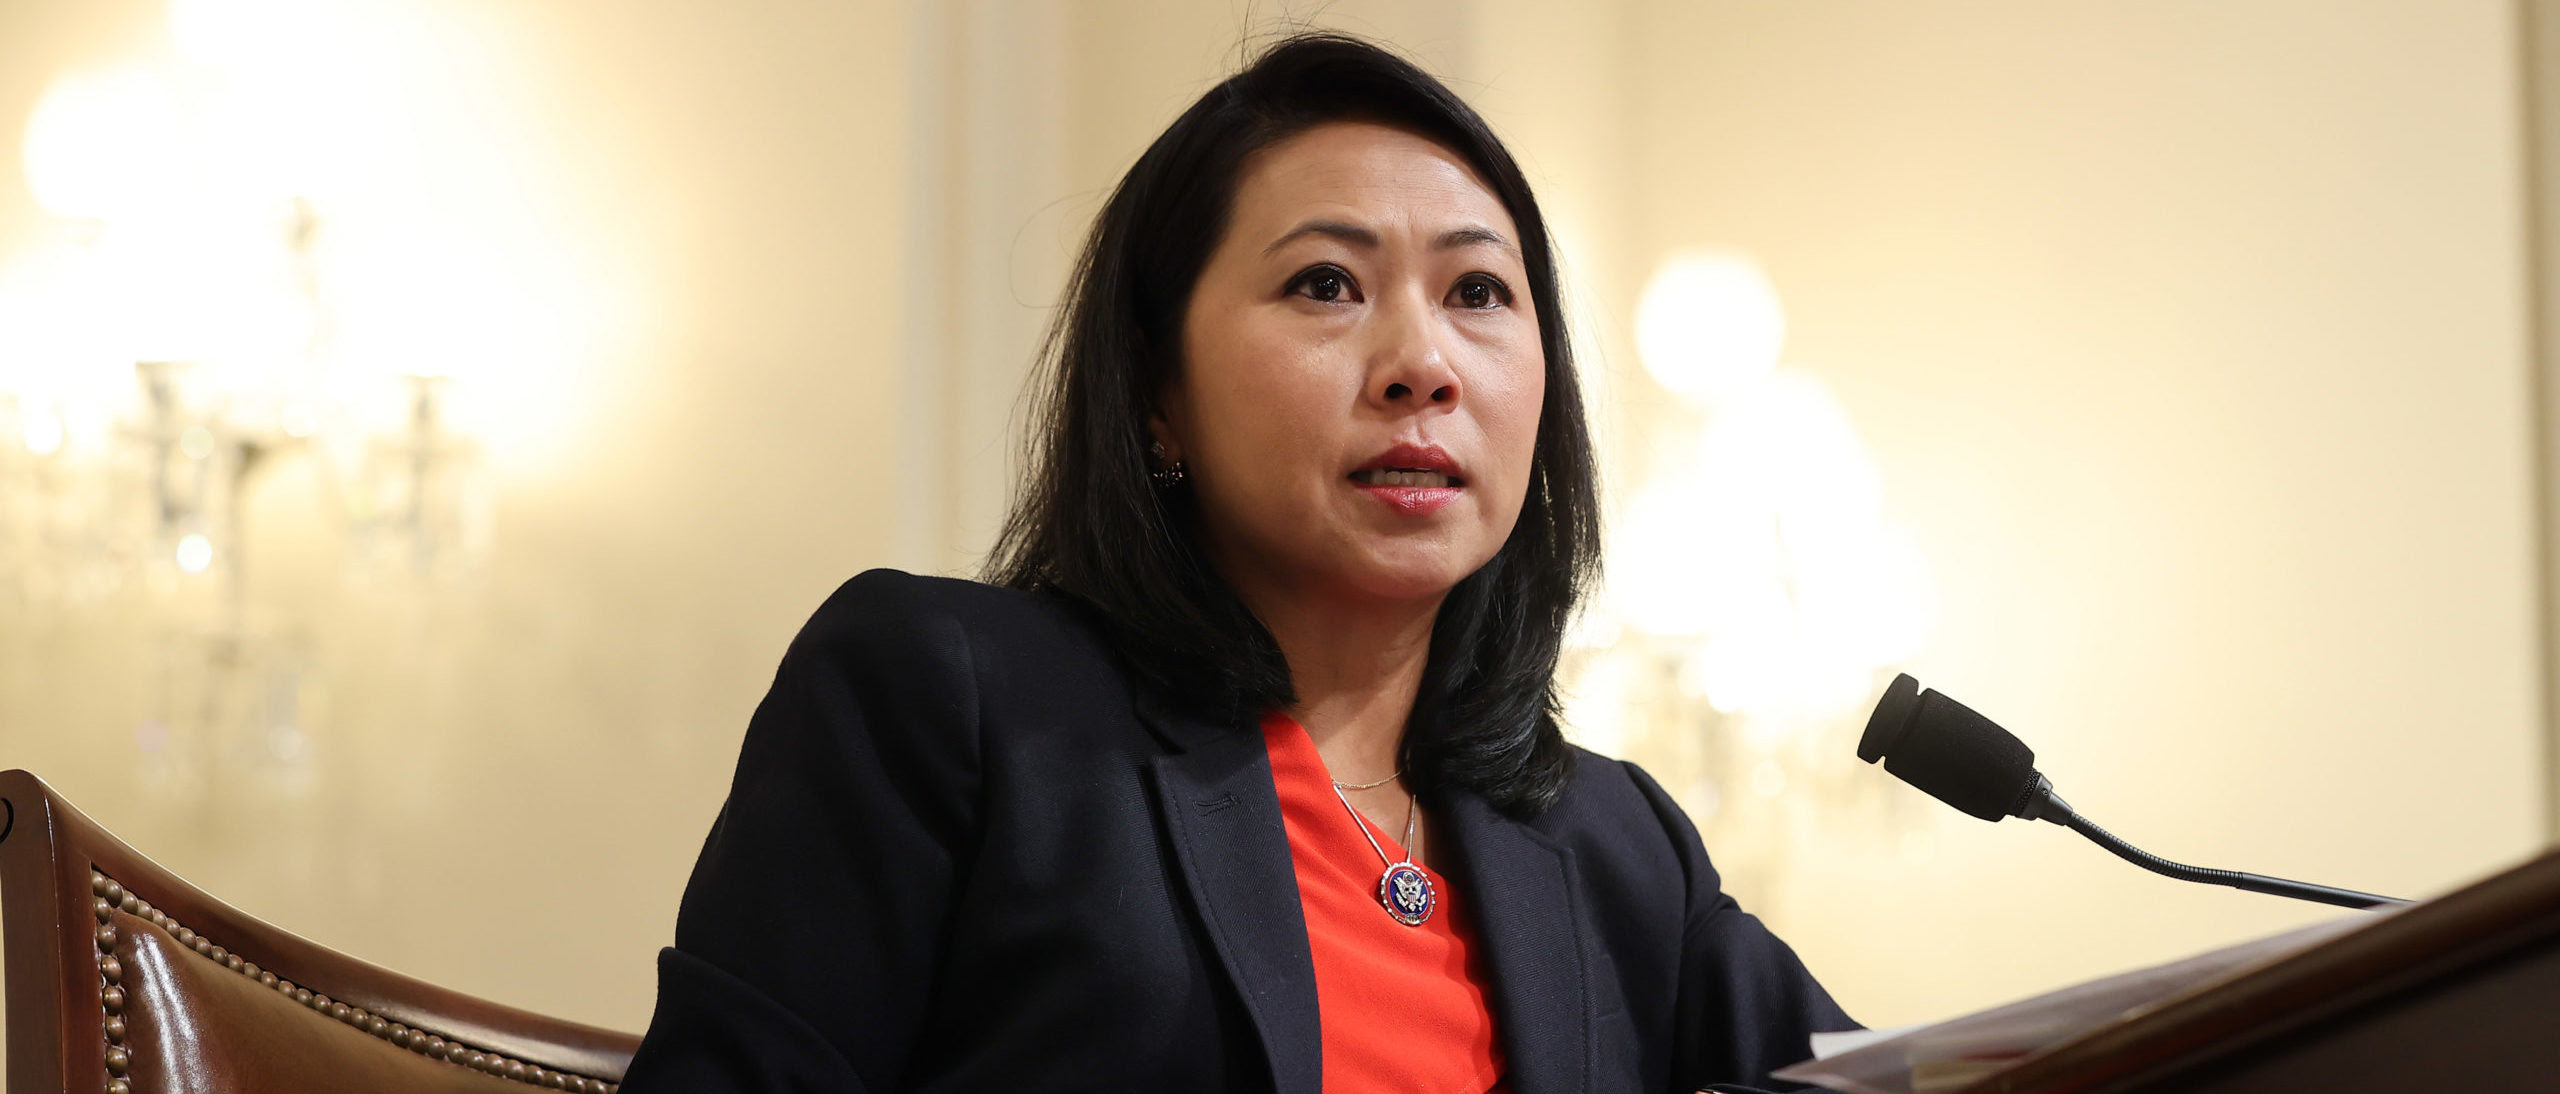 Rep. Stephanie Murphy Flames Party For Promising ‘Rainbows And Unicorns,’ Abandoning Moderates